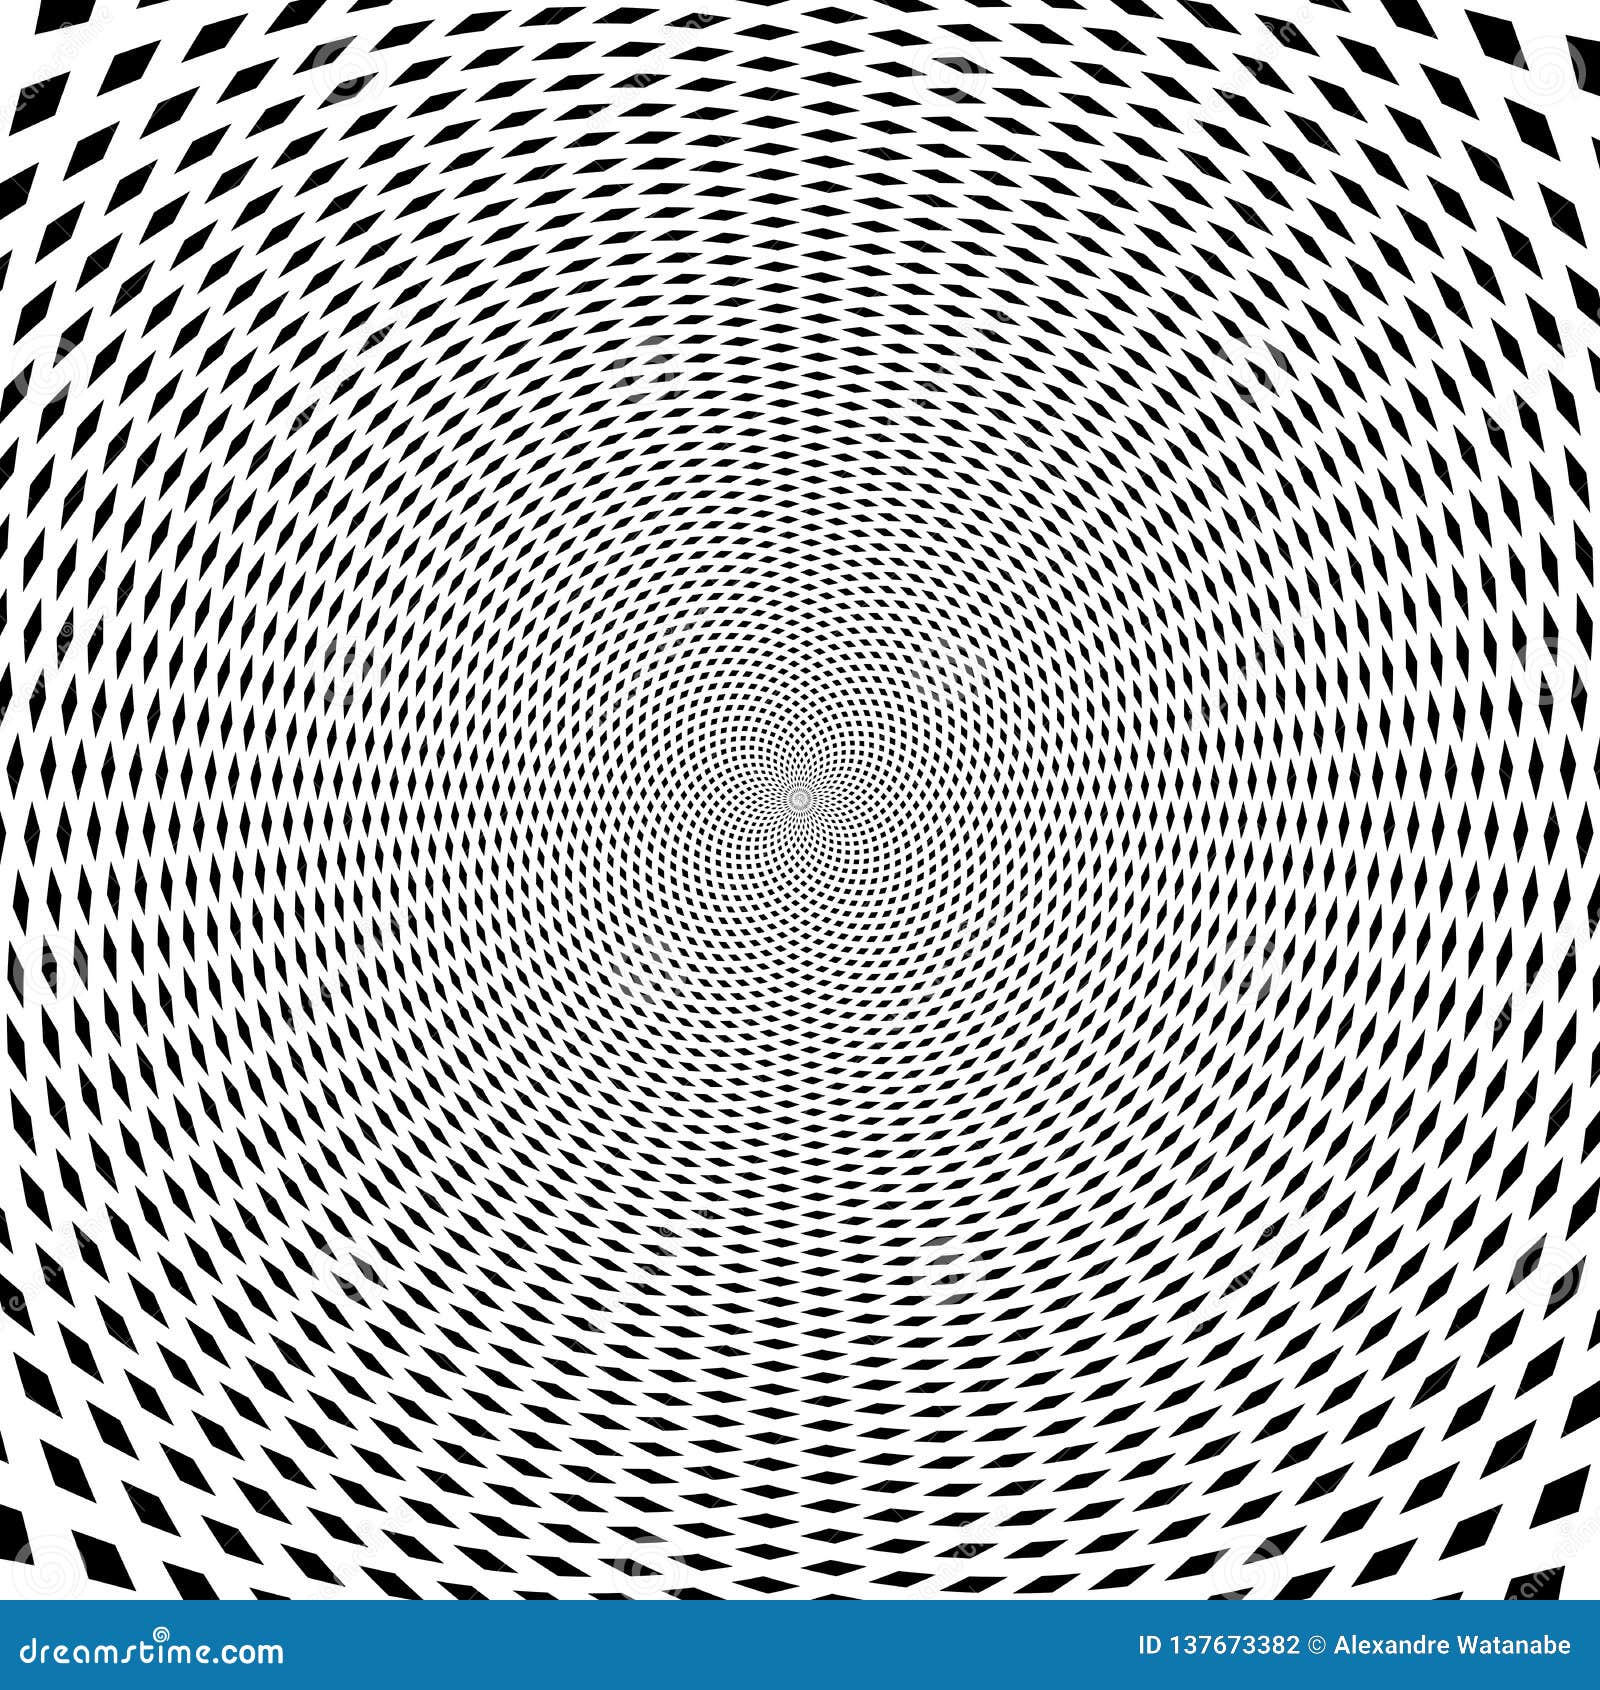 Psychedelic Optical Spin Illusion Background Stock Illustration ...